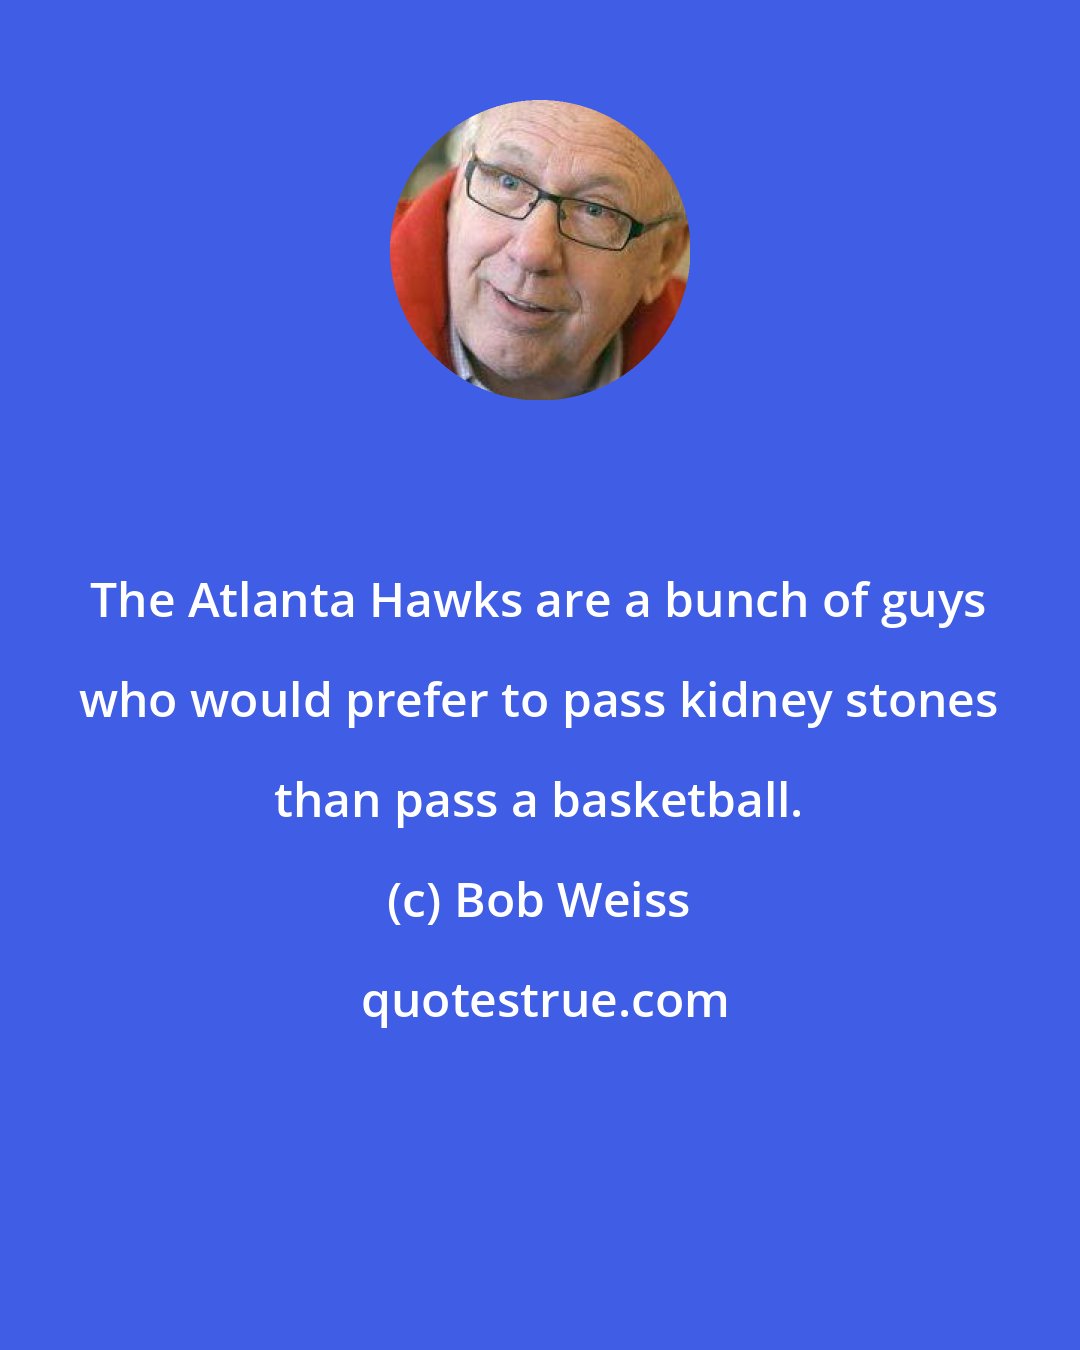 Bob Weiss: The Atlanta Hawks are a bunch of guys who would prefer to pass kidney stones than pass a basketball.